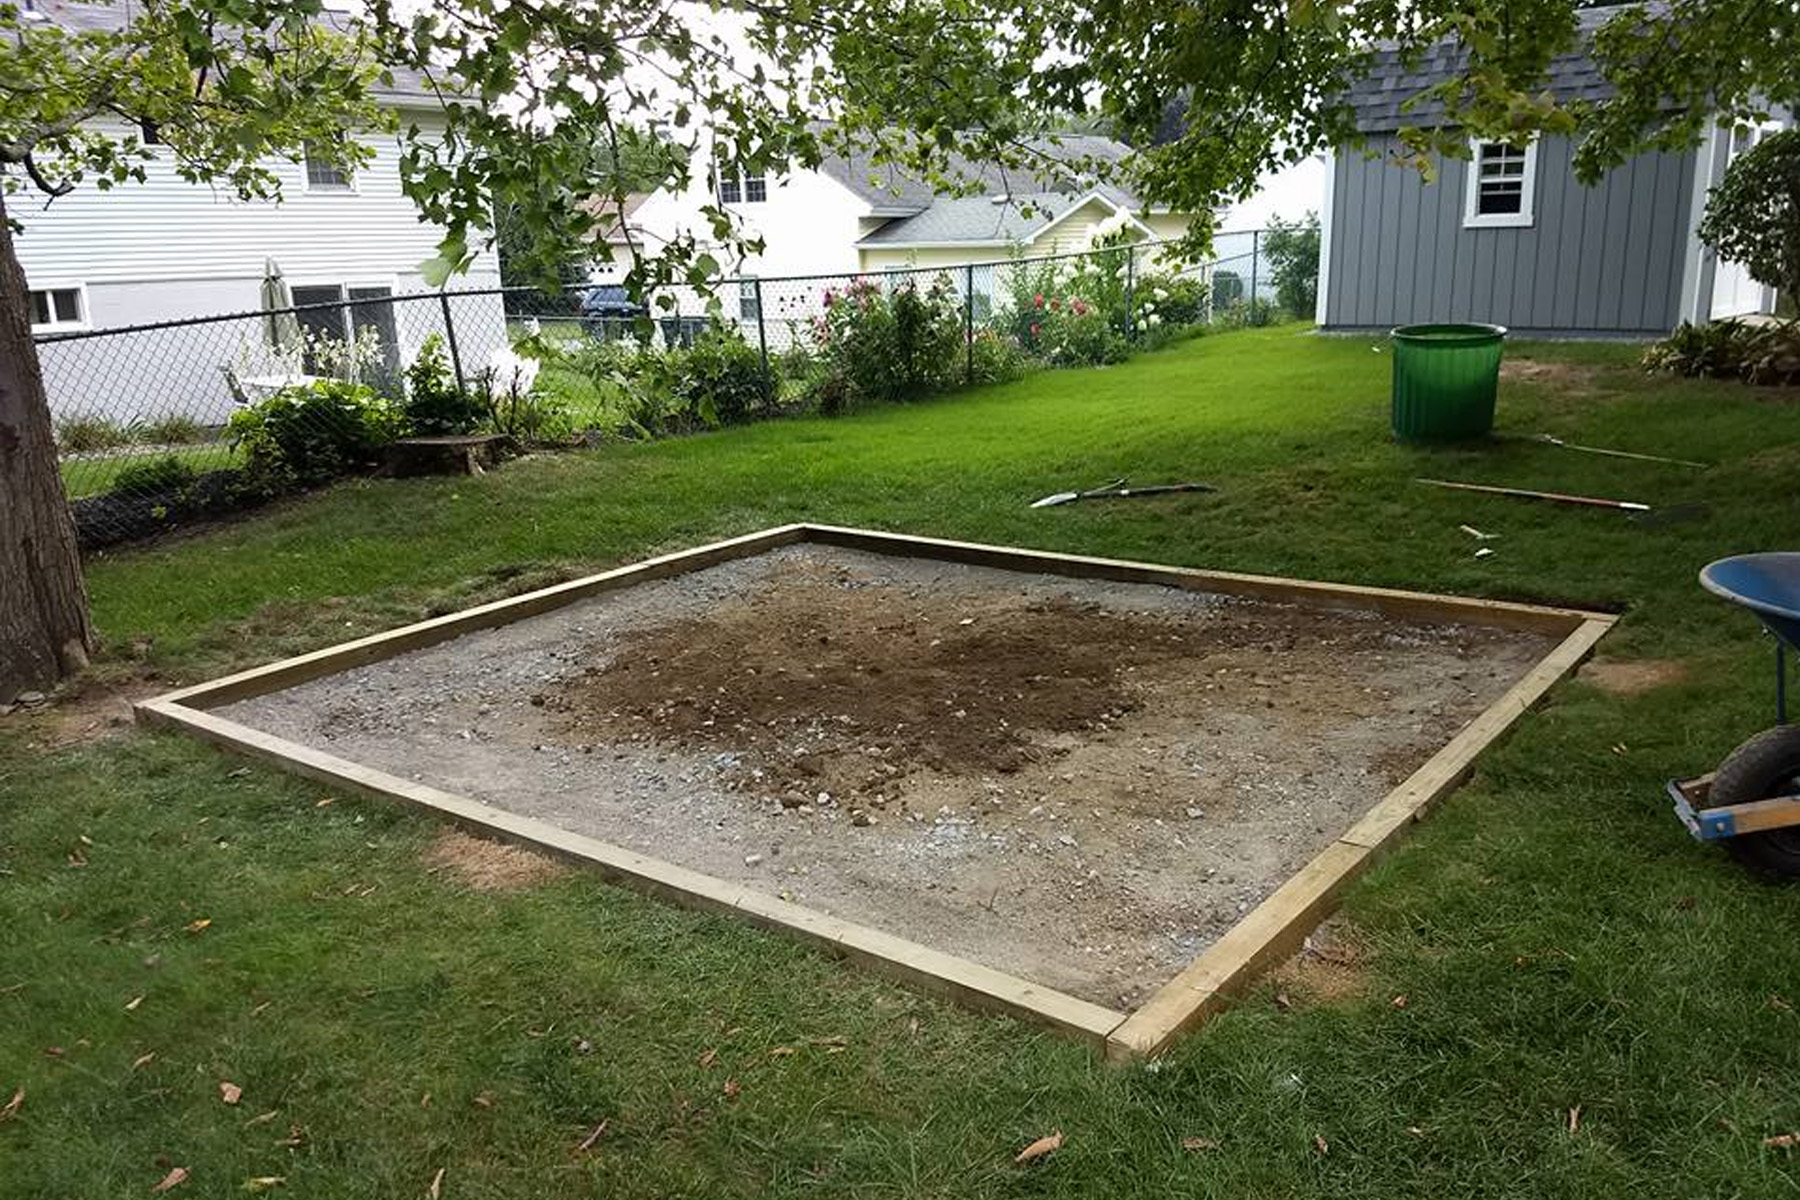 A newly framed patio area with dirt and landscaping sand being added to the center